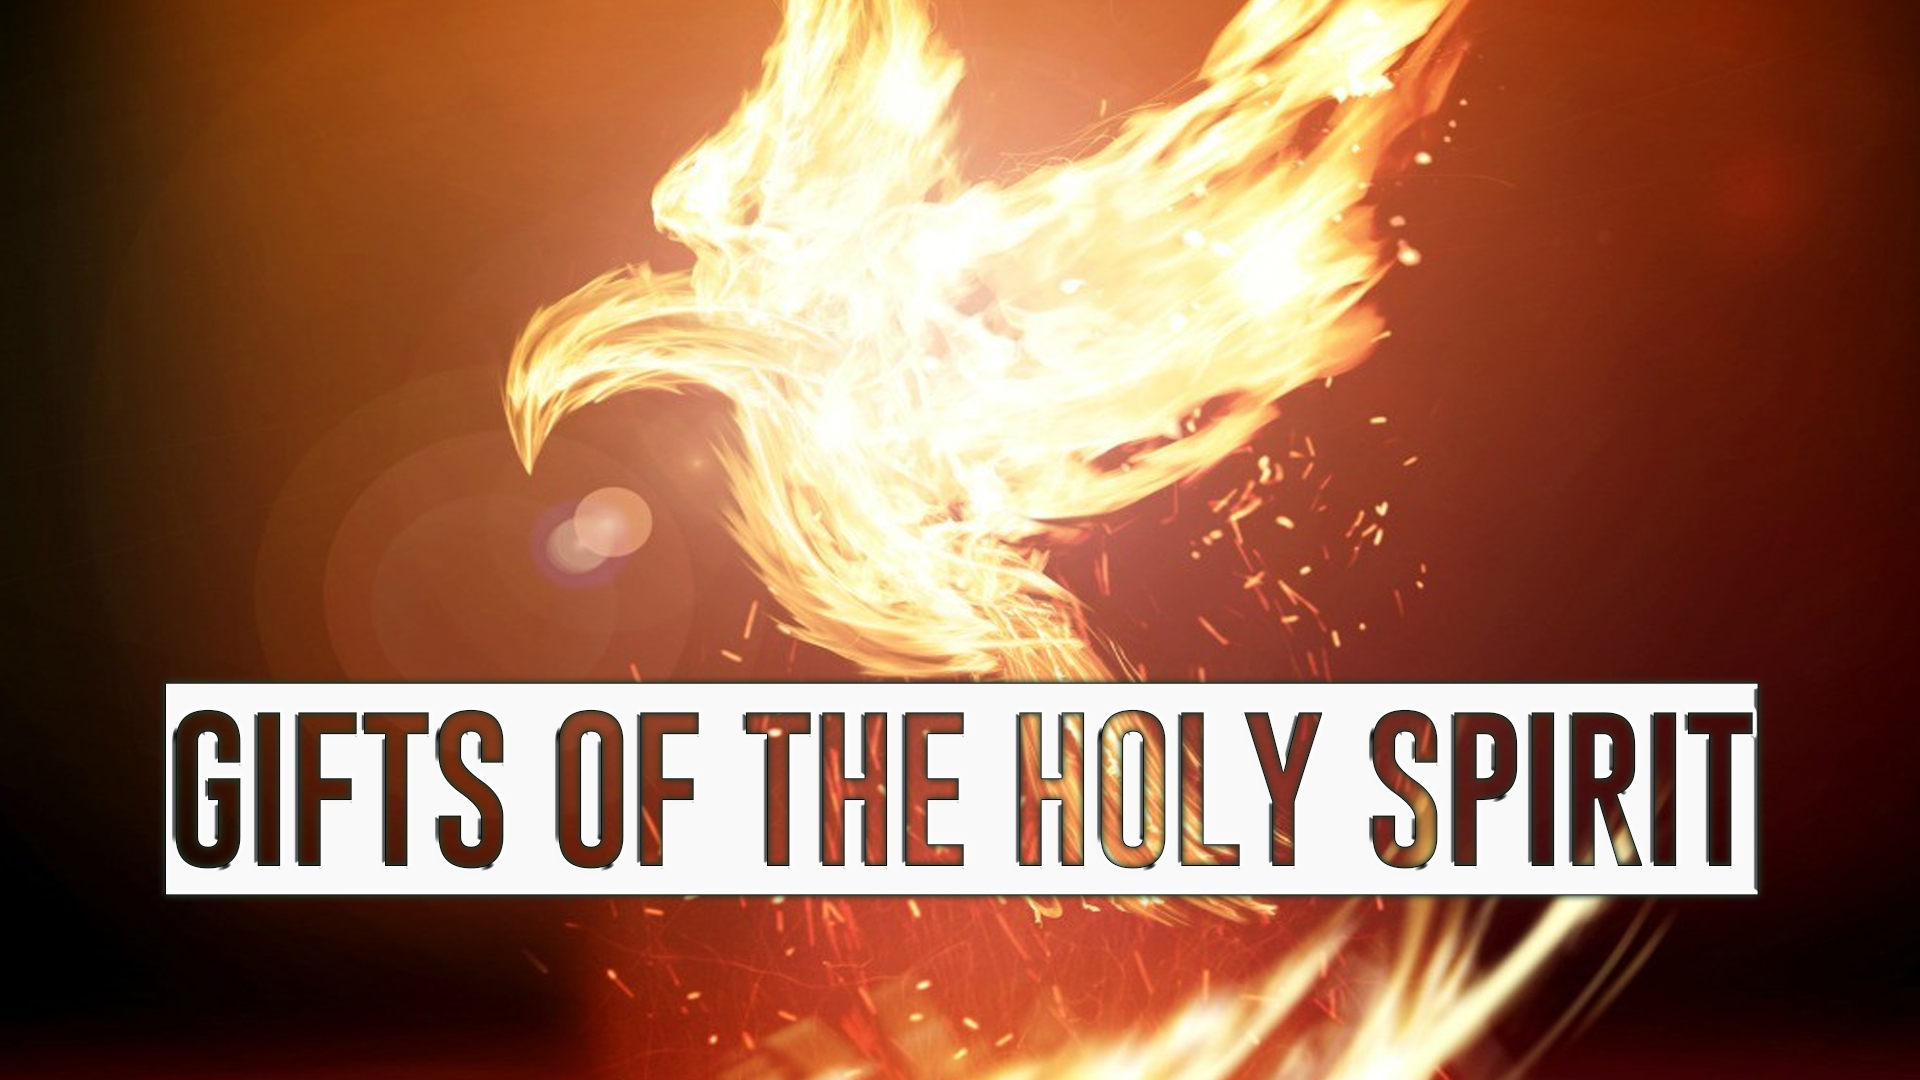 The Spiritual Gifts of the Holy Spirit According to Romans 12:6-8 - WISDOM  FROM HEAVEN